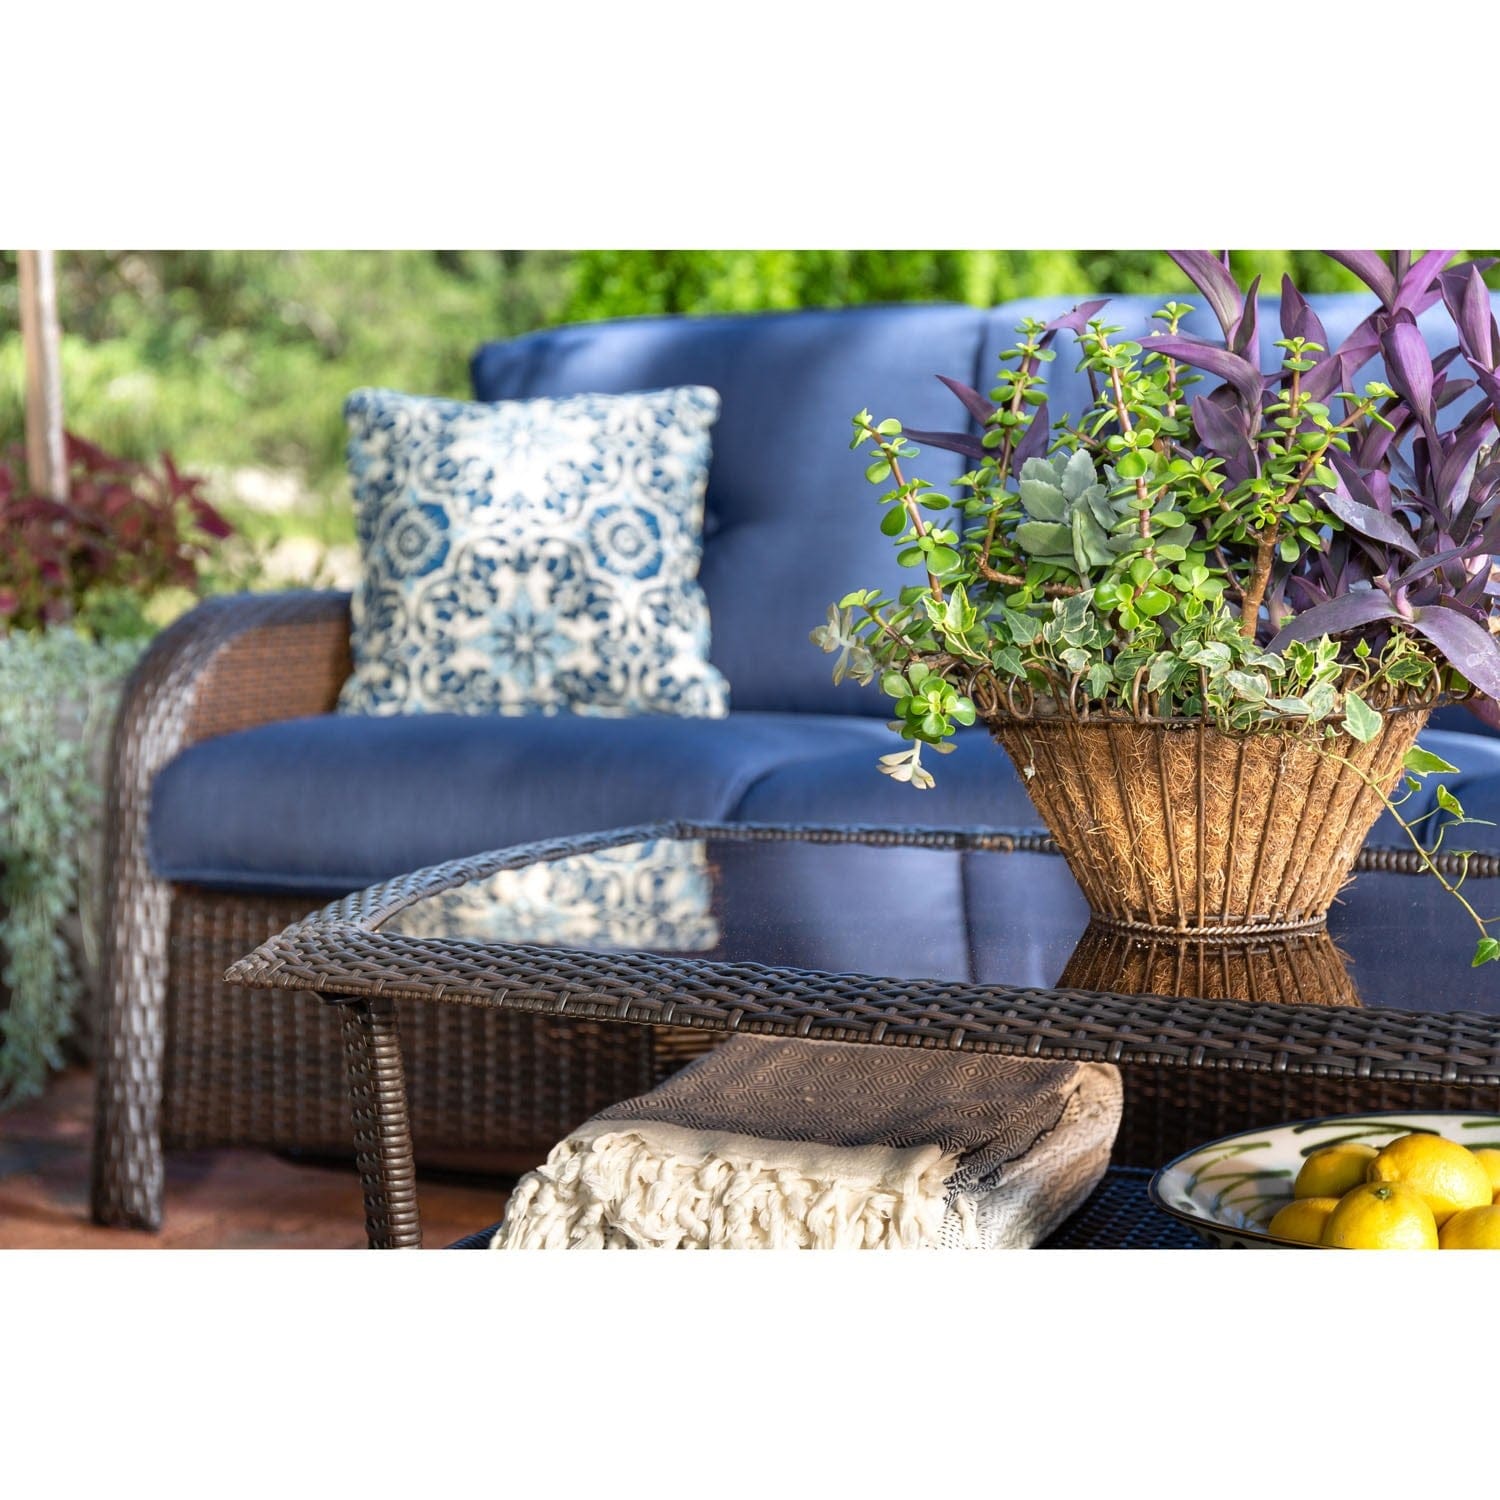 Hanover Conversation Set Hanover - Strathmere 6-Piece Wicker Lounge Set in Navy Blue | STRATH6PC-S-NVY